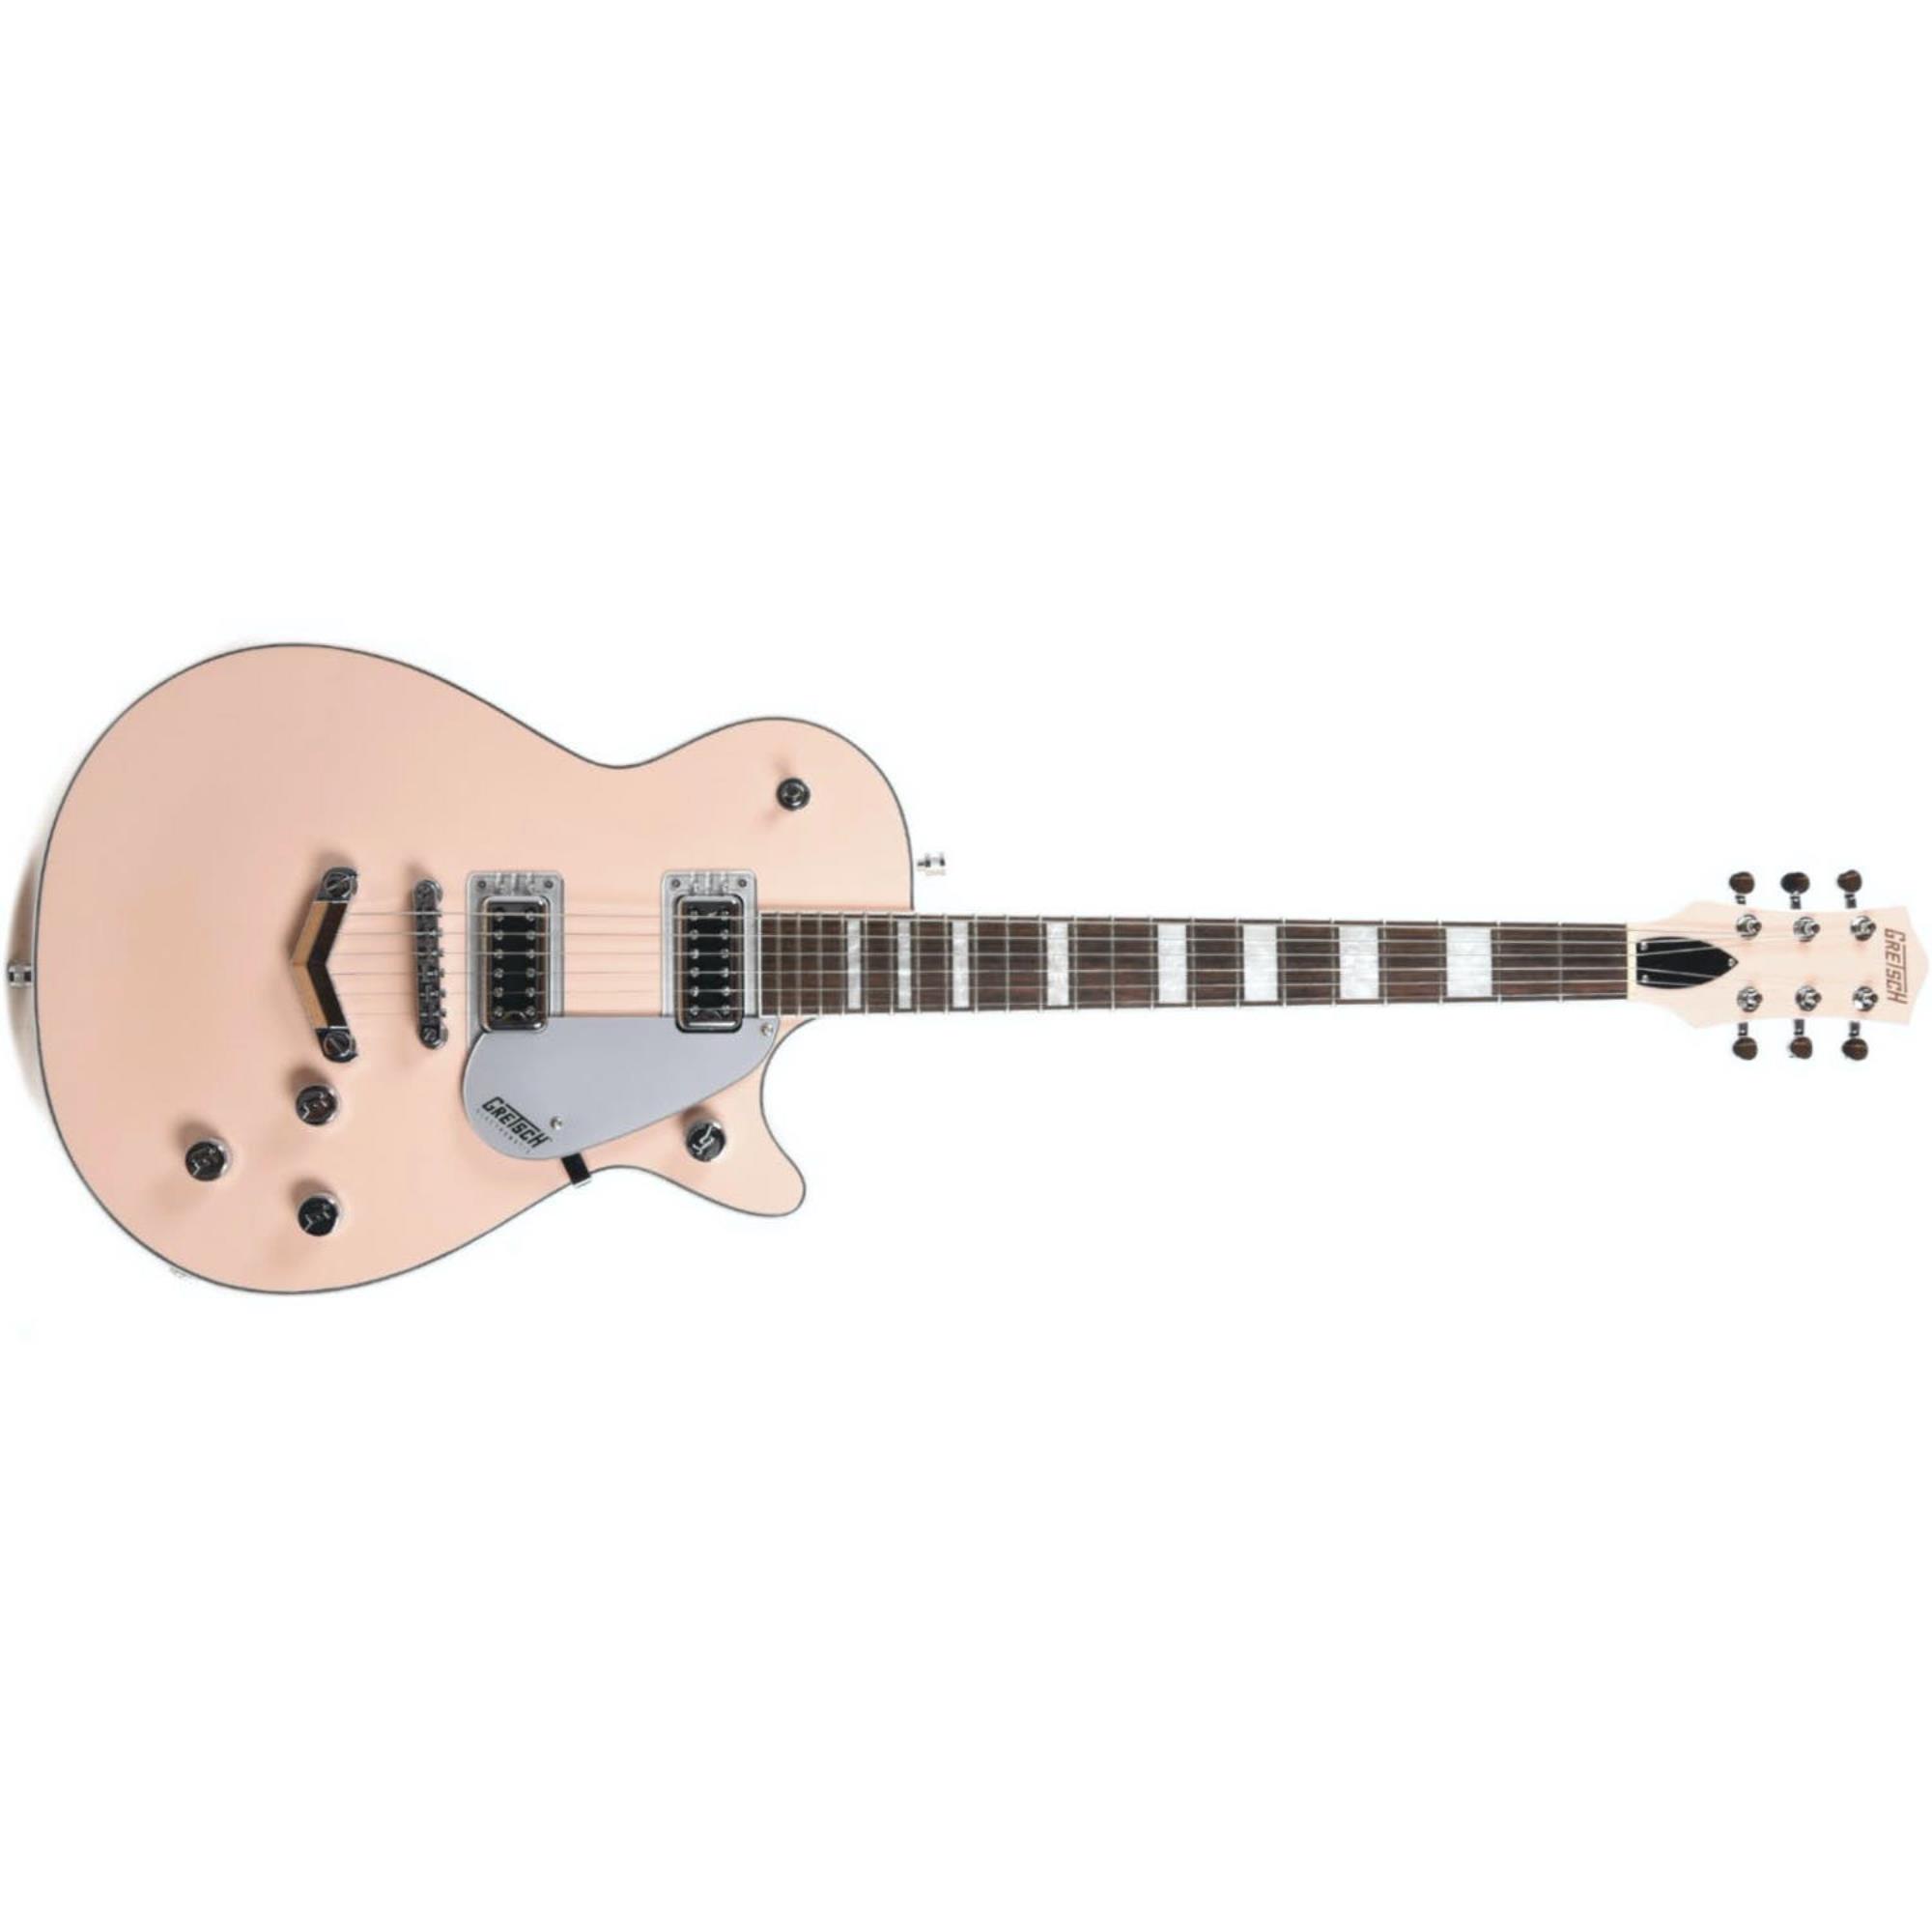 GRETSCH-Limited-Edition-G5230-Electromatic-Jet-FT-Shell-Pink-2519210556-sku-25118